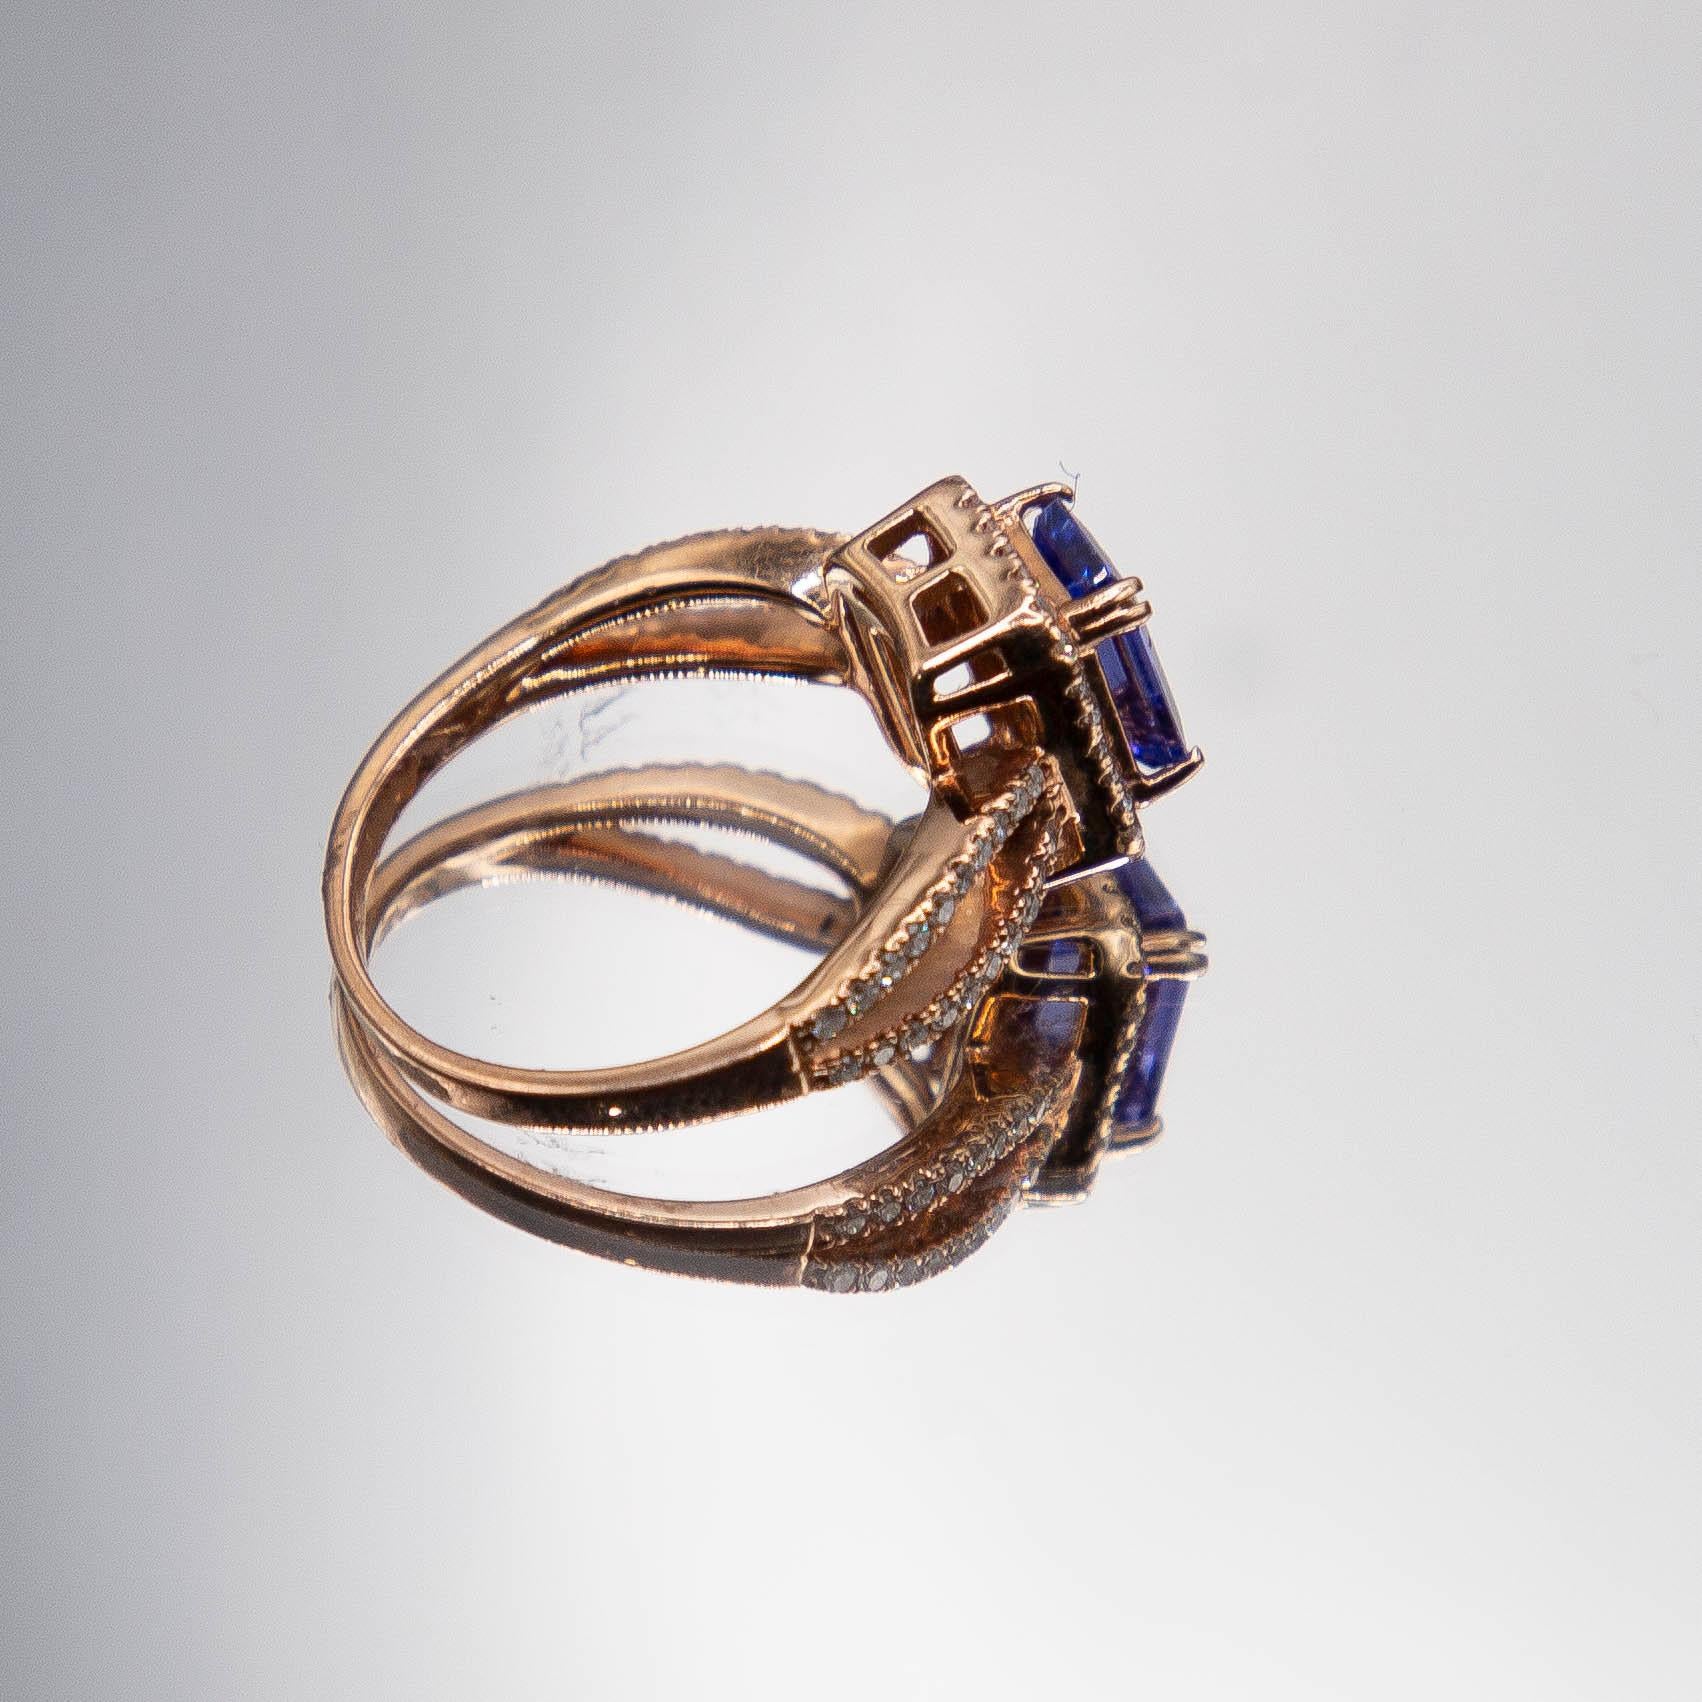 A 14k rose gold ring features a near- flawless emerald-cut Tanzanite at 1.05 carats. The center gem sets in 4 split prongs, radiating a spectacular violetish- blue, resting inside a halo of fine white diamonds. Total diamond weight amongst 68